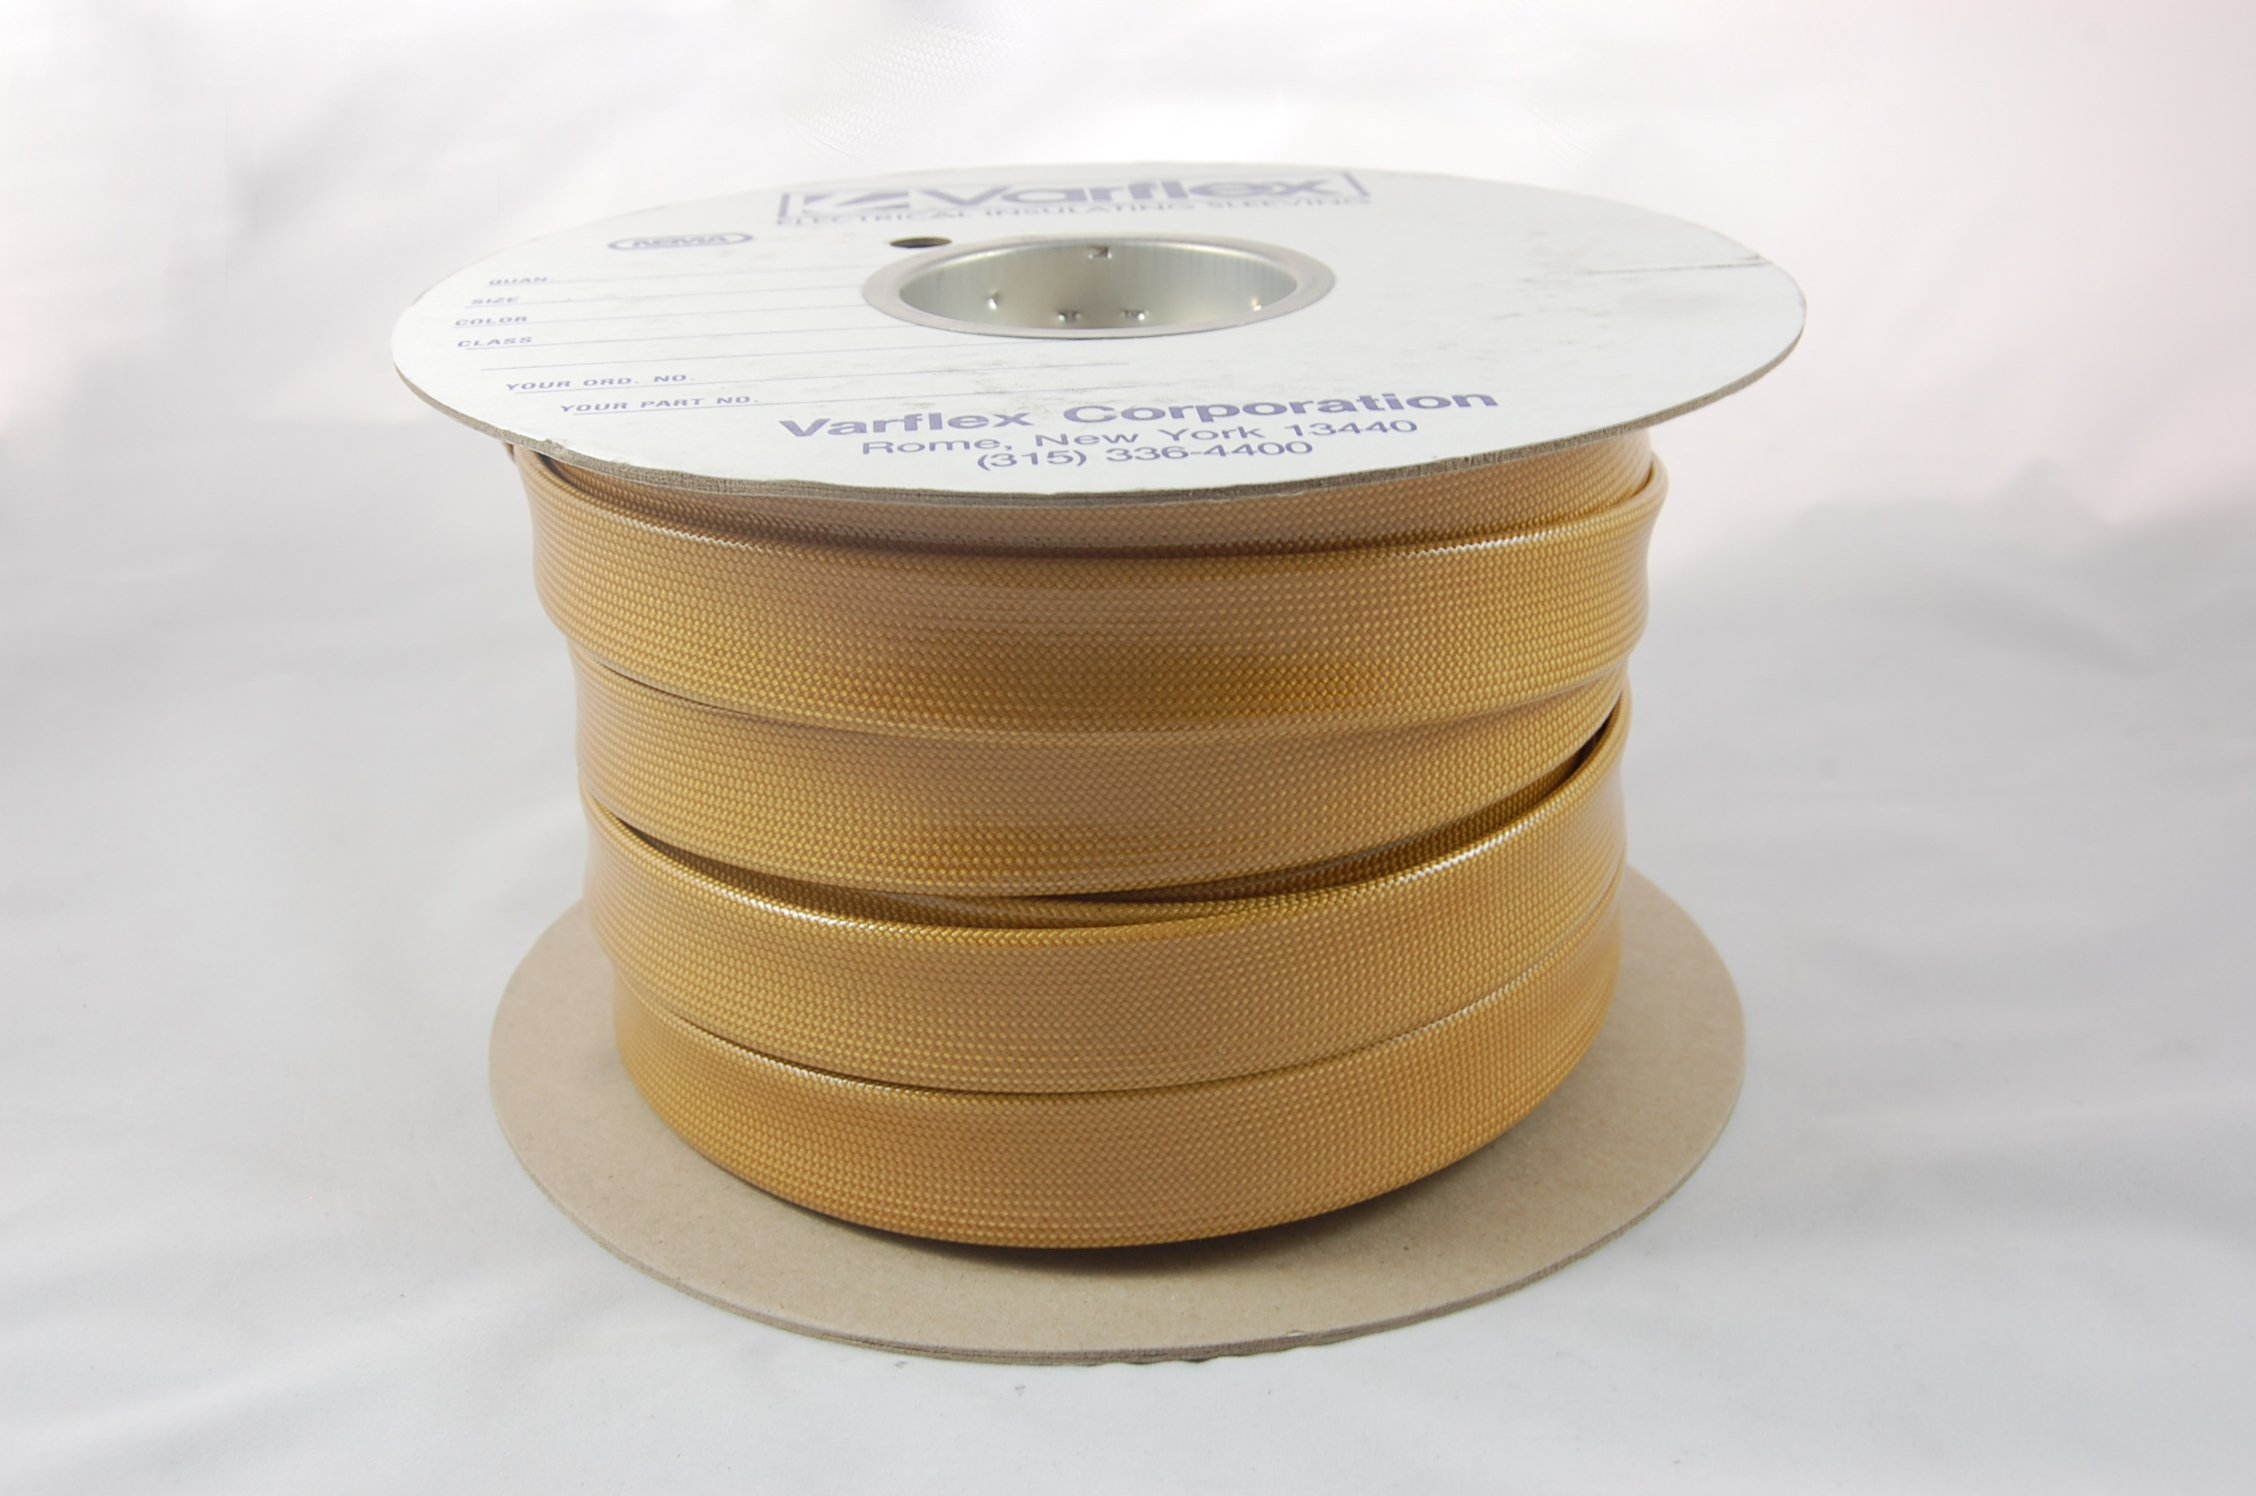 1" AWG Varglas Silicone Resin 500 Grade H-A-1 (8000V) High Temperature Silicone Resin Coated Braided Fiberglass Sleeving 200°C, natural, 100 FT per spool